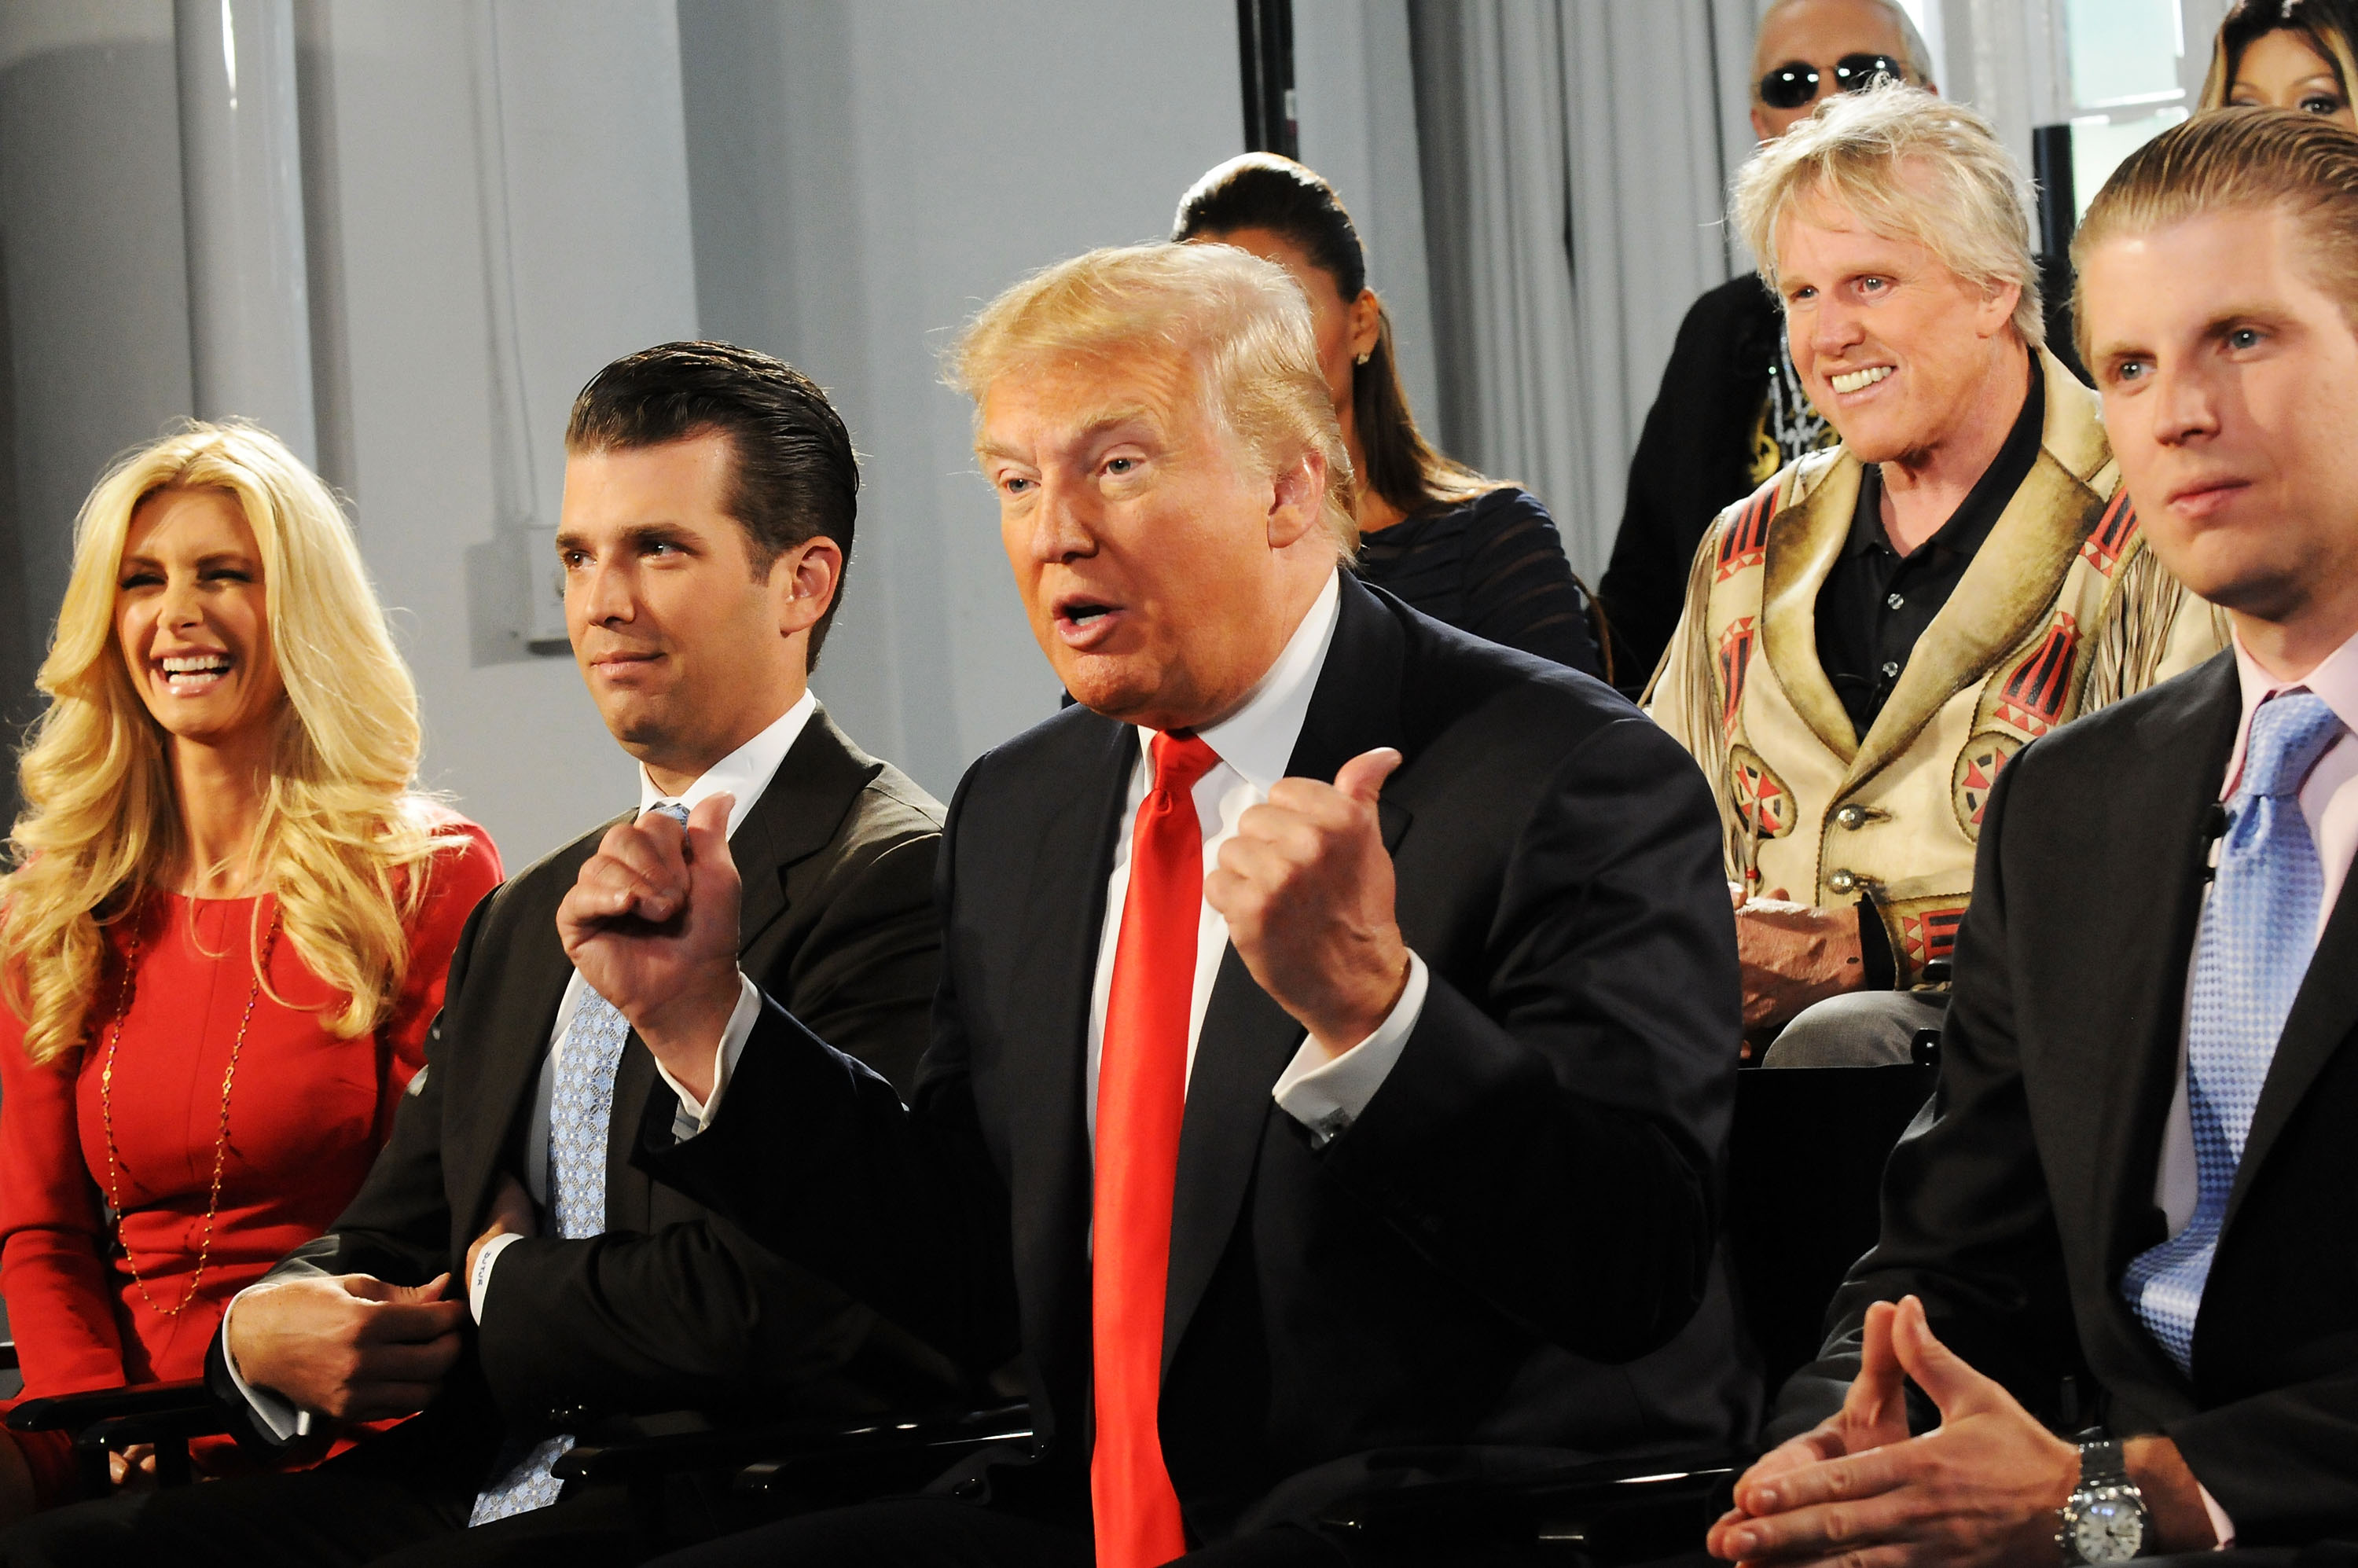 Brande Roderick, Donald Trump Jr.,Donald Trump, Gary Busey and Eric Trump attend the <i>Celebrity Apprentice All Stars</i> Season 13 Press Conference on October 12, 2012 in New York City. (Desiree Navarro—WireImage/Getty Images)